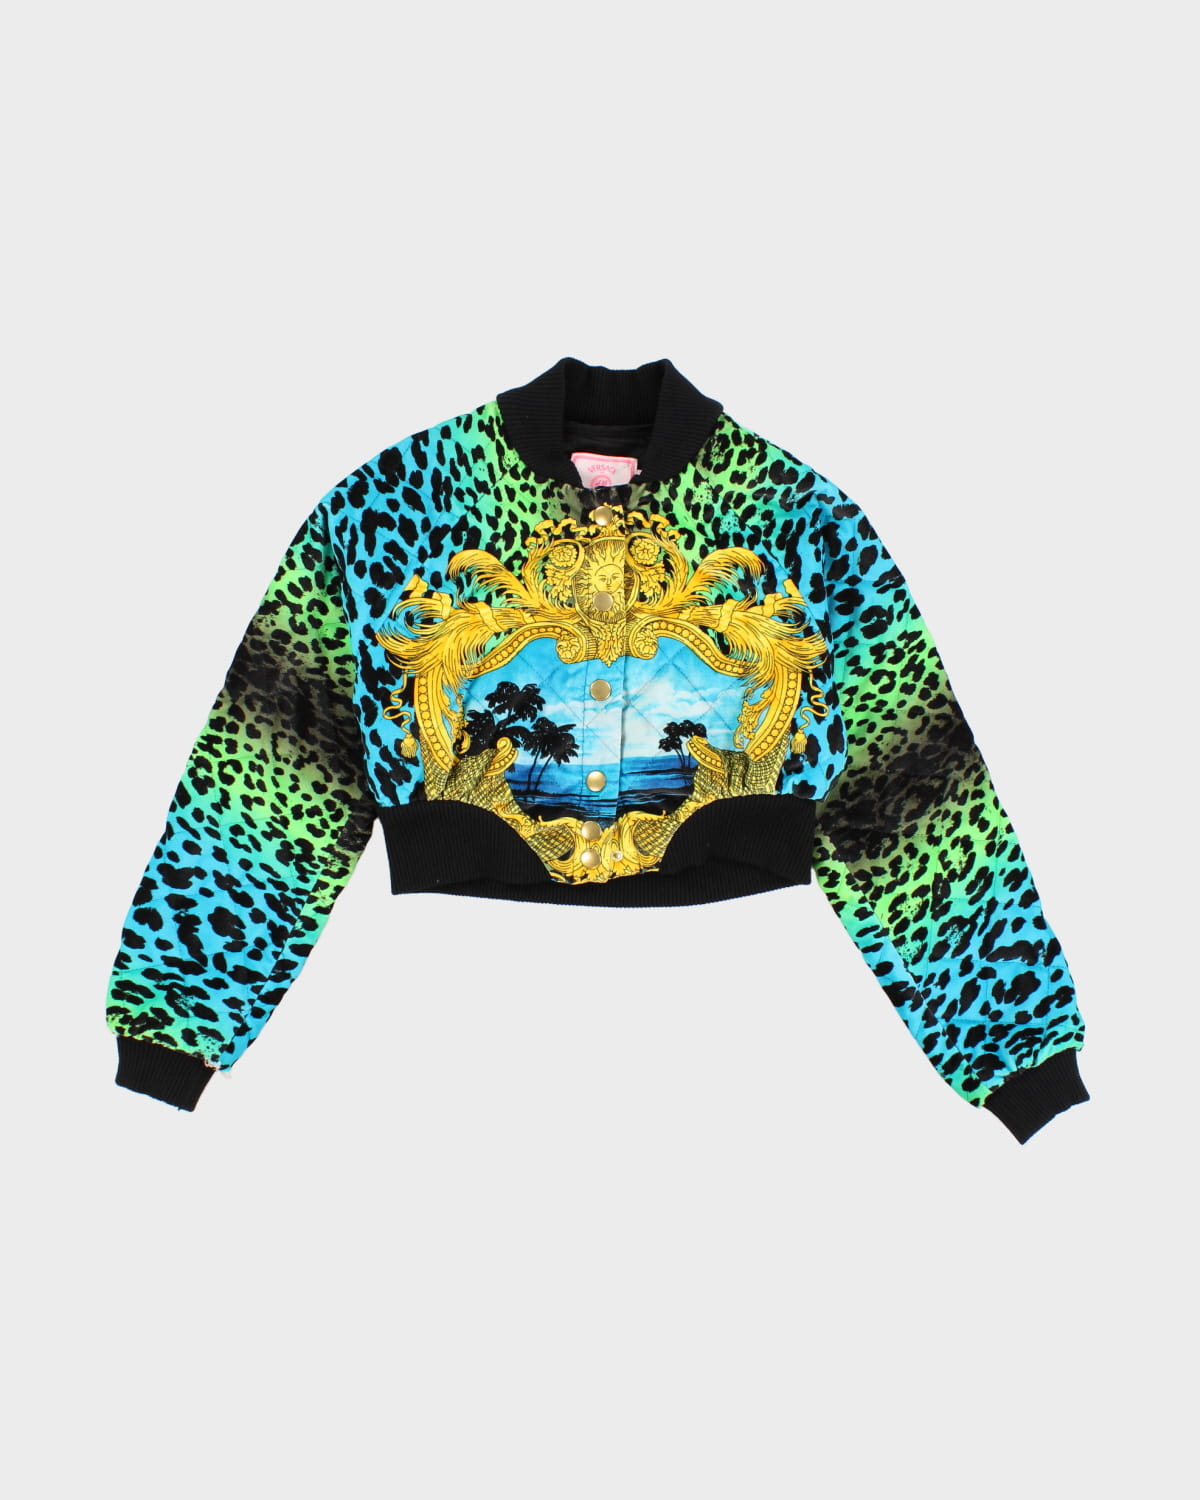 Versace x H&M Cropped Bomber Jacket - S